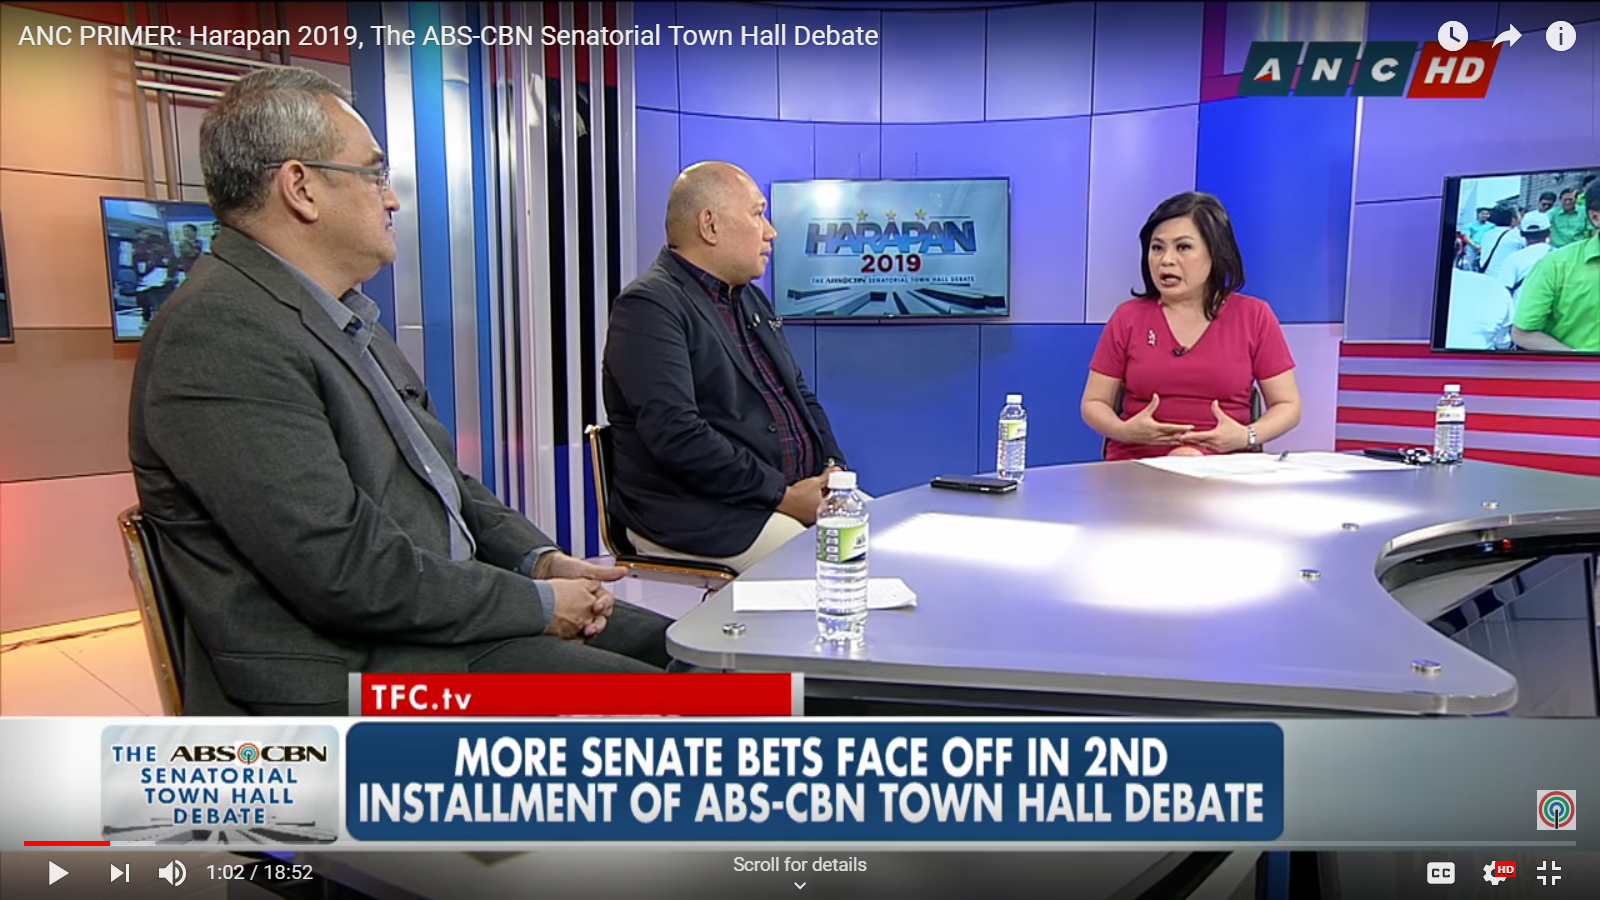 Pre-debate discussion of ANC's #Harapan2019